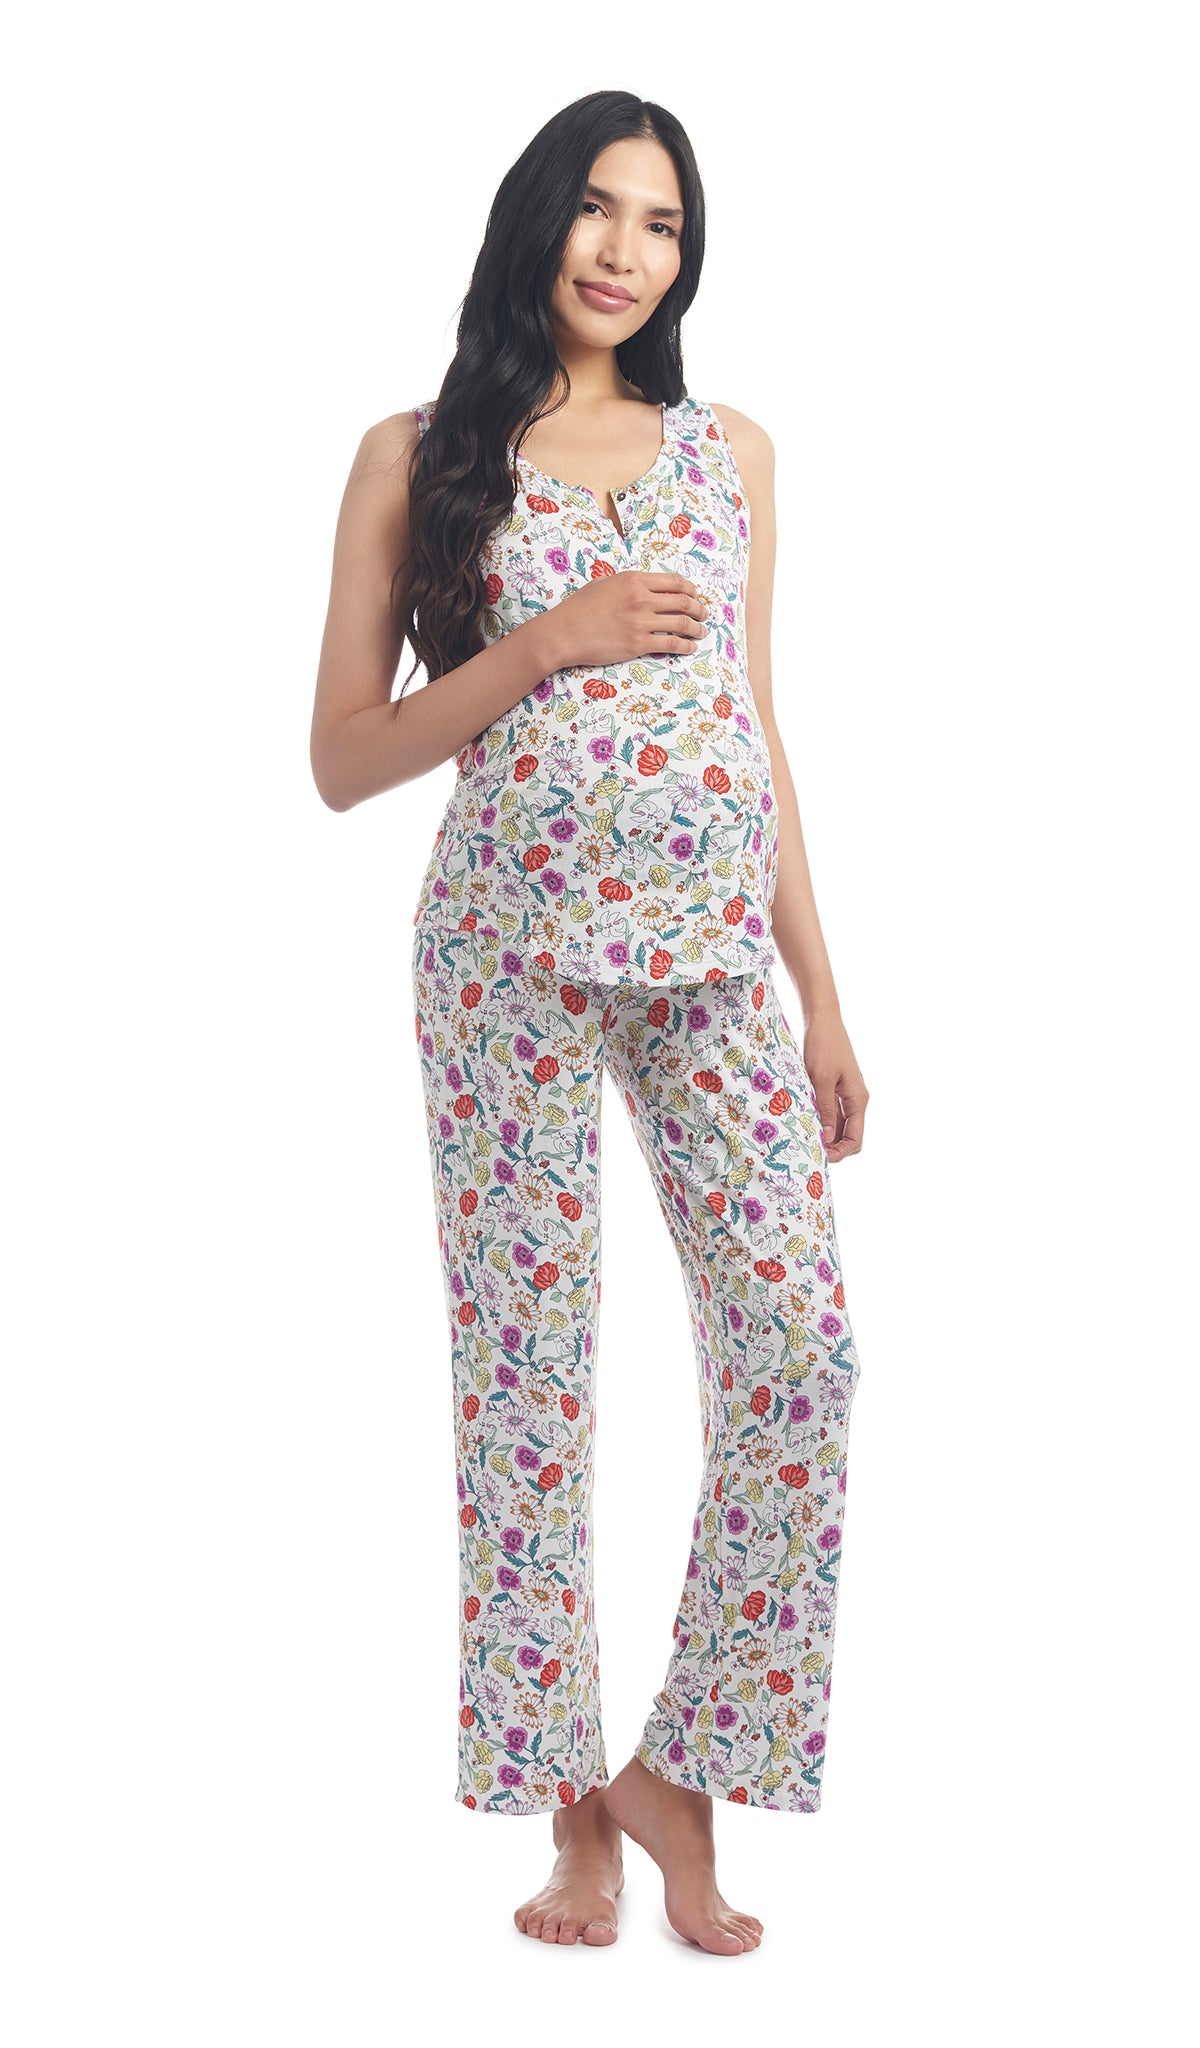 Zinnia Joy 2-Piece Set. Pregnant woman wearing button front placket tank top and pant.